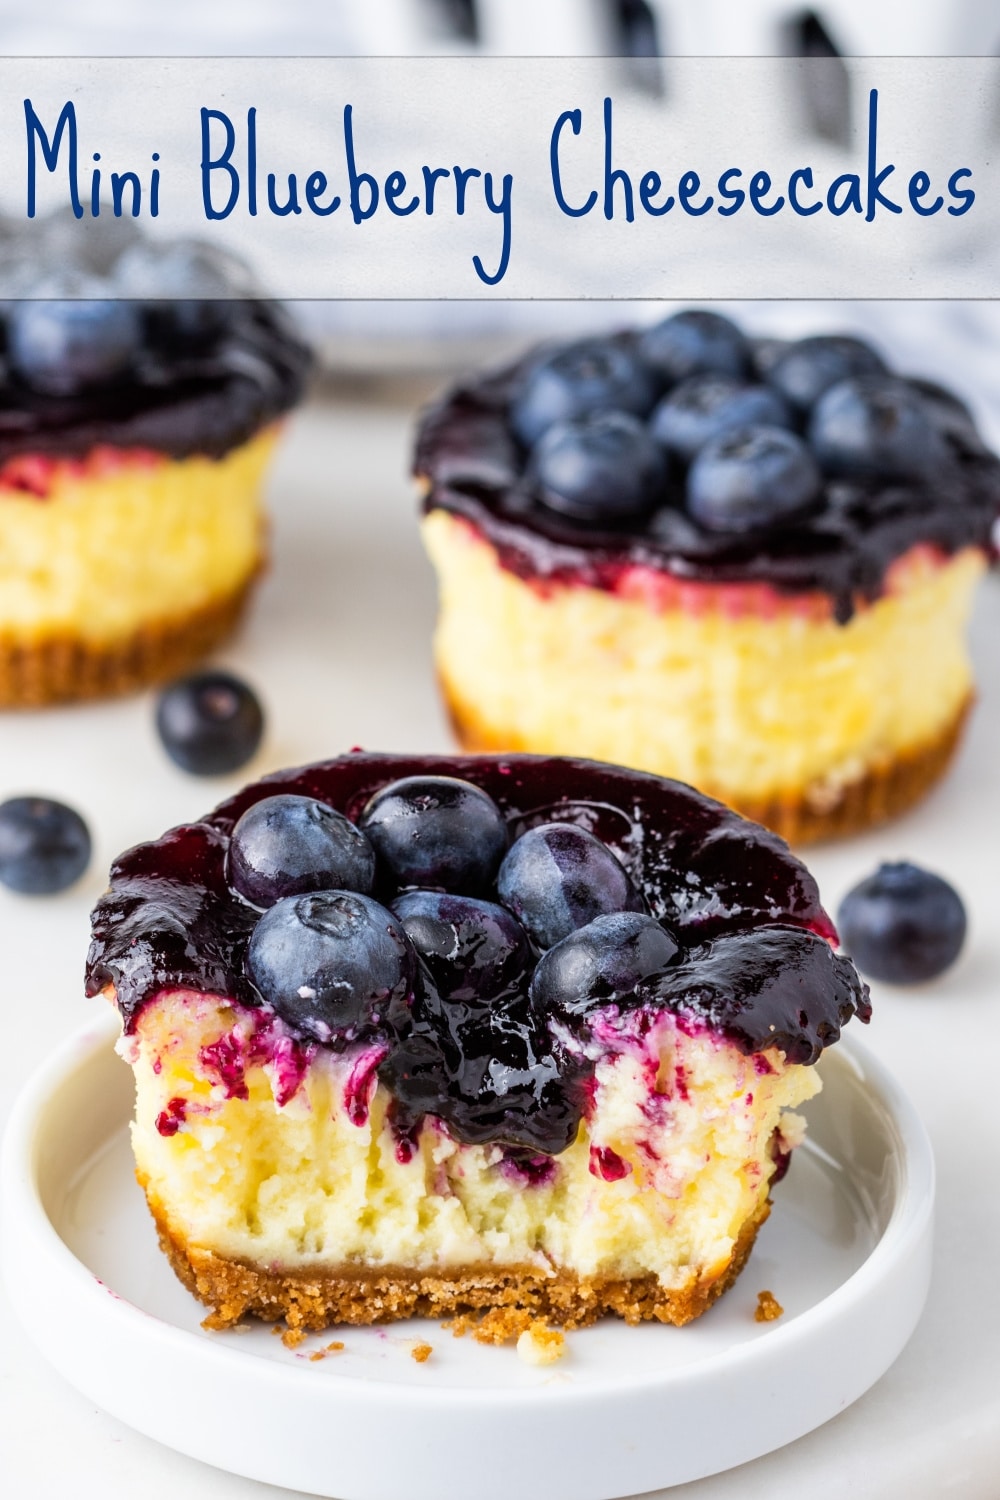 Topped with fresh, juicy blueberries and blueberry sauce, these mini blueberry cheesecakes are ready to make an appearance at all your summer gatherings. This simple recipe is easy to pack up and take to every barbecue this season. via @cmpollak1